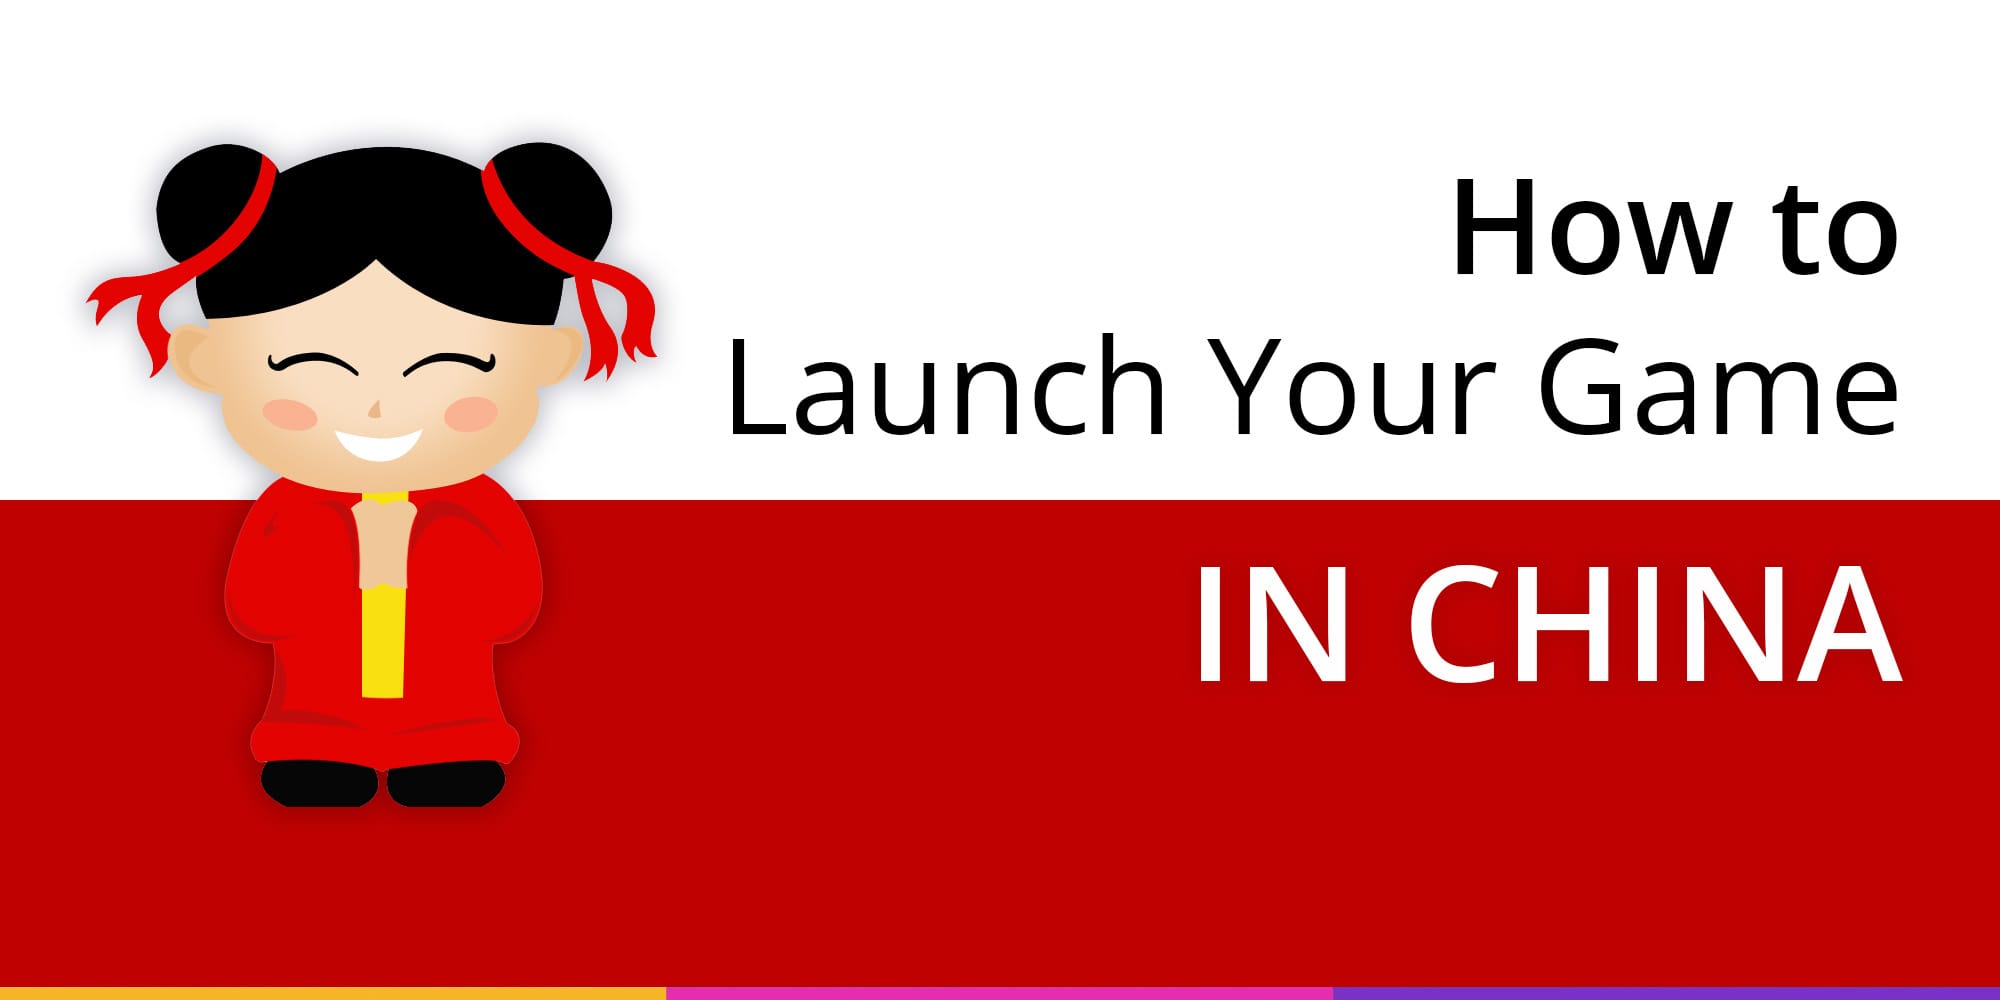 4 steps to launch your game in China